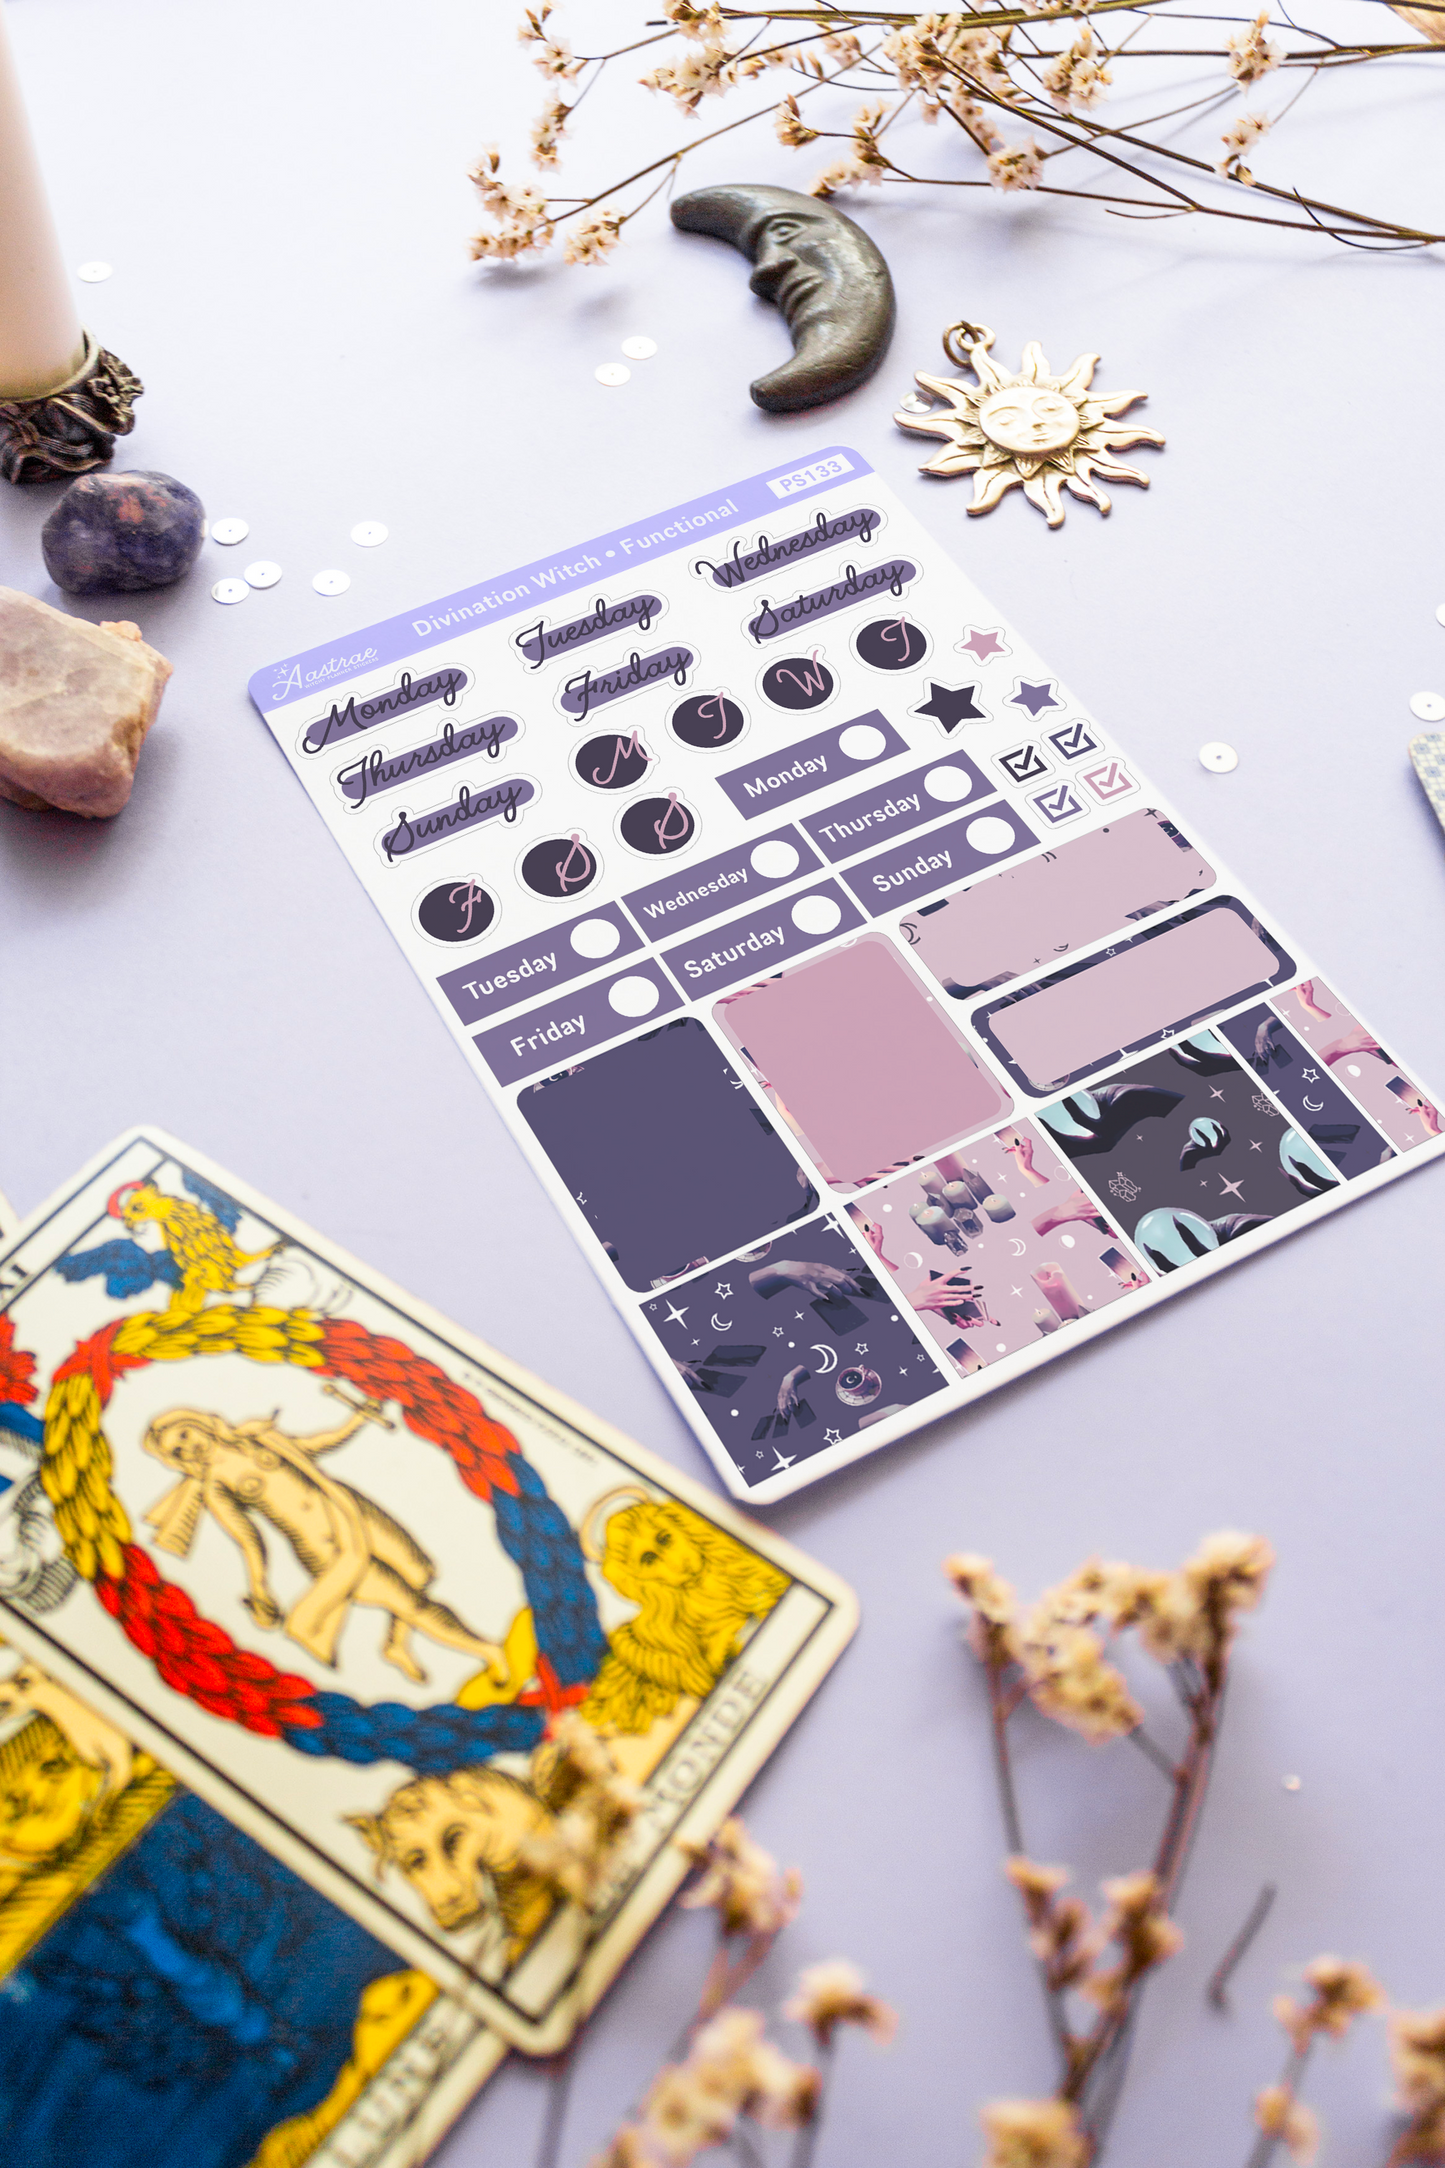 Divination Witch Journaling Stickers